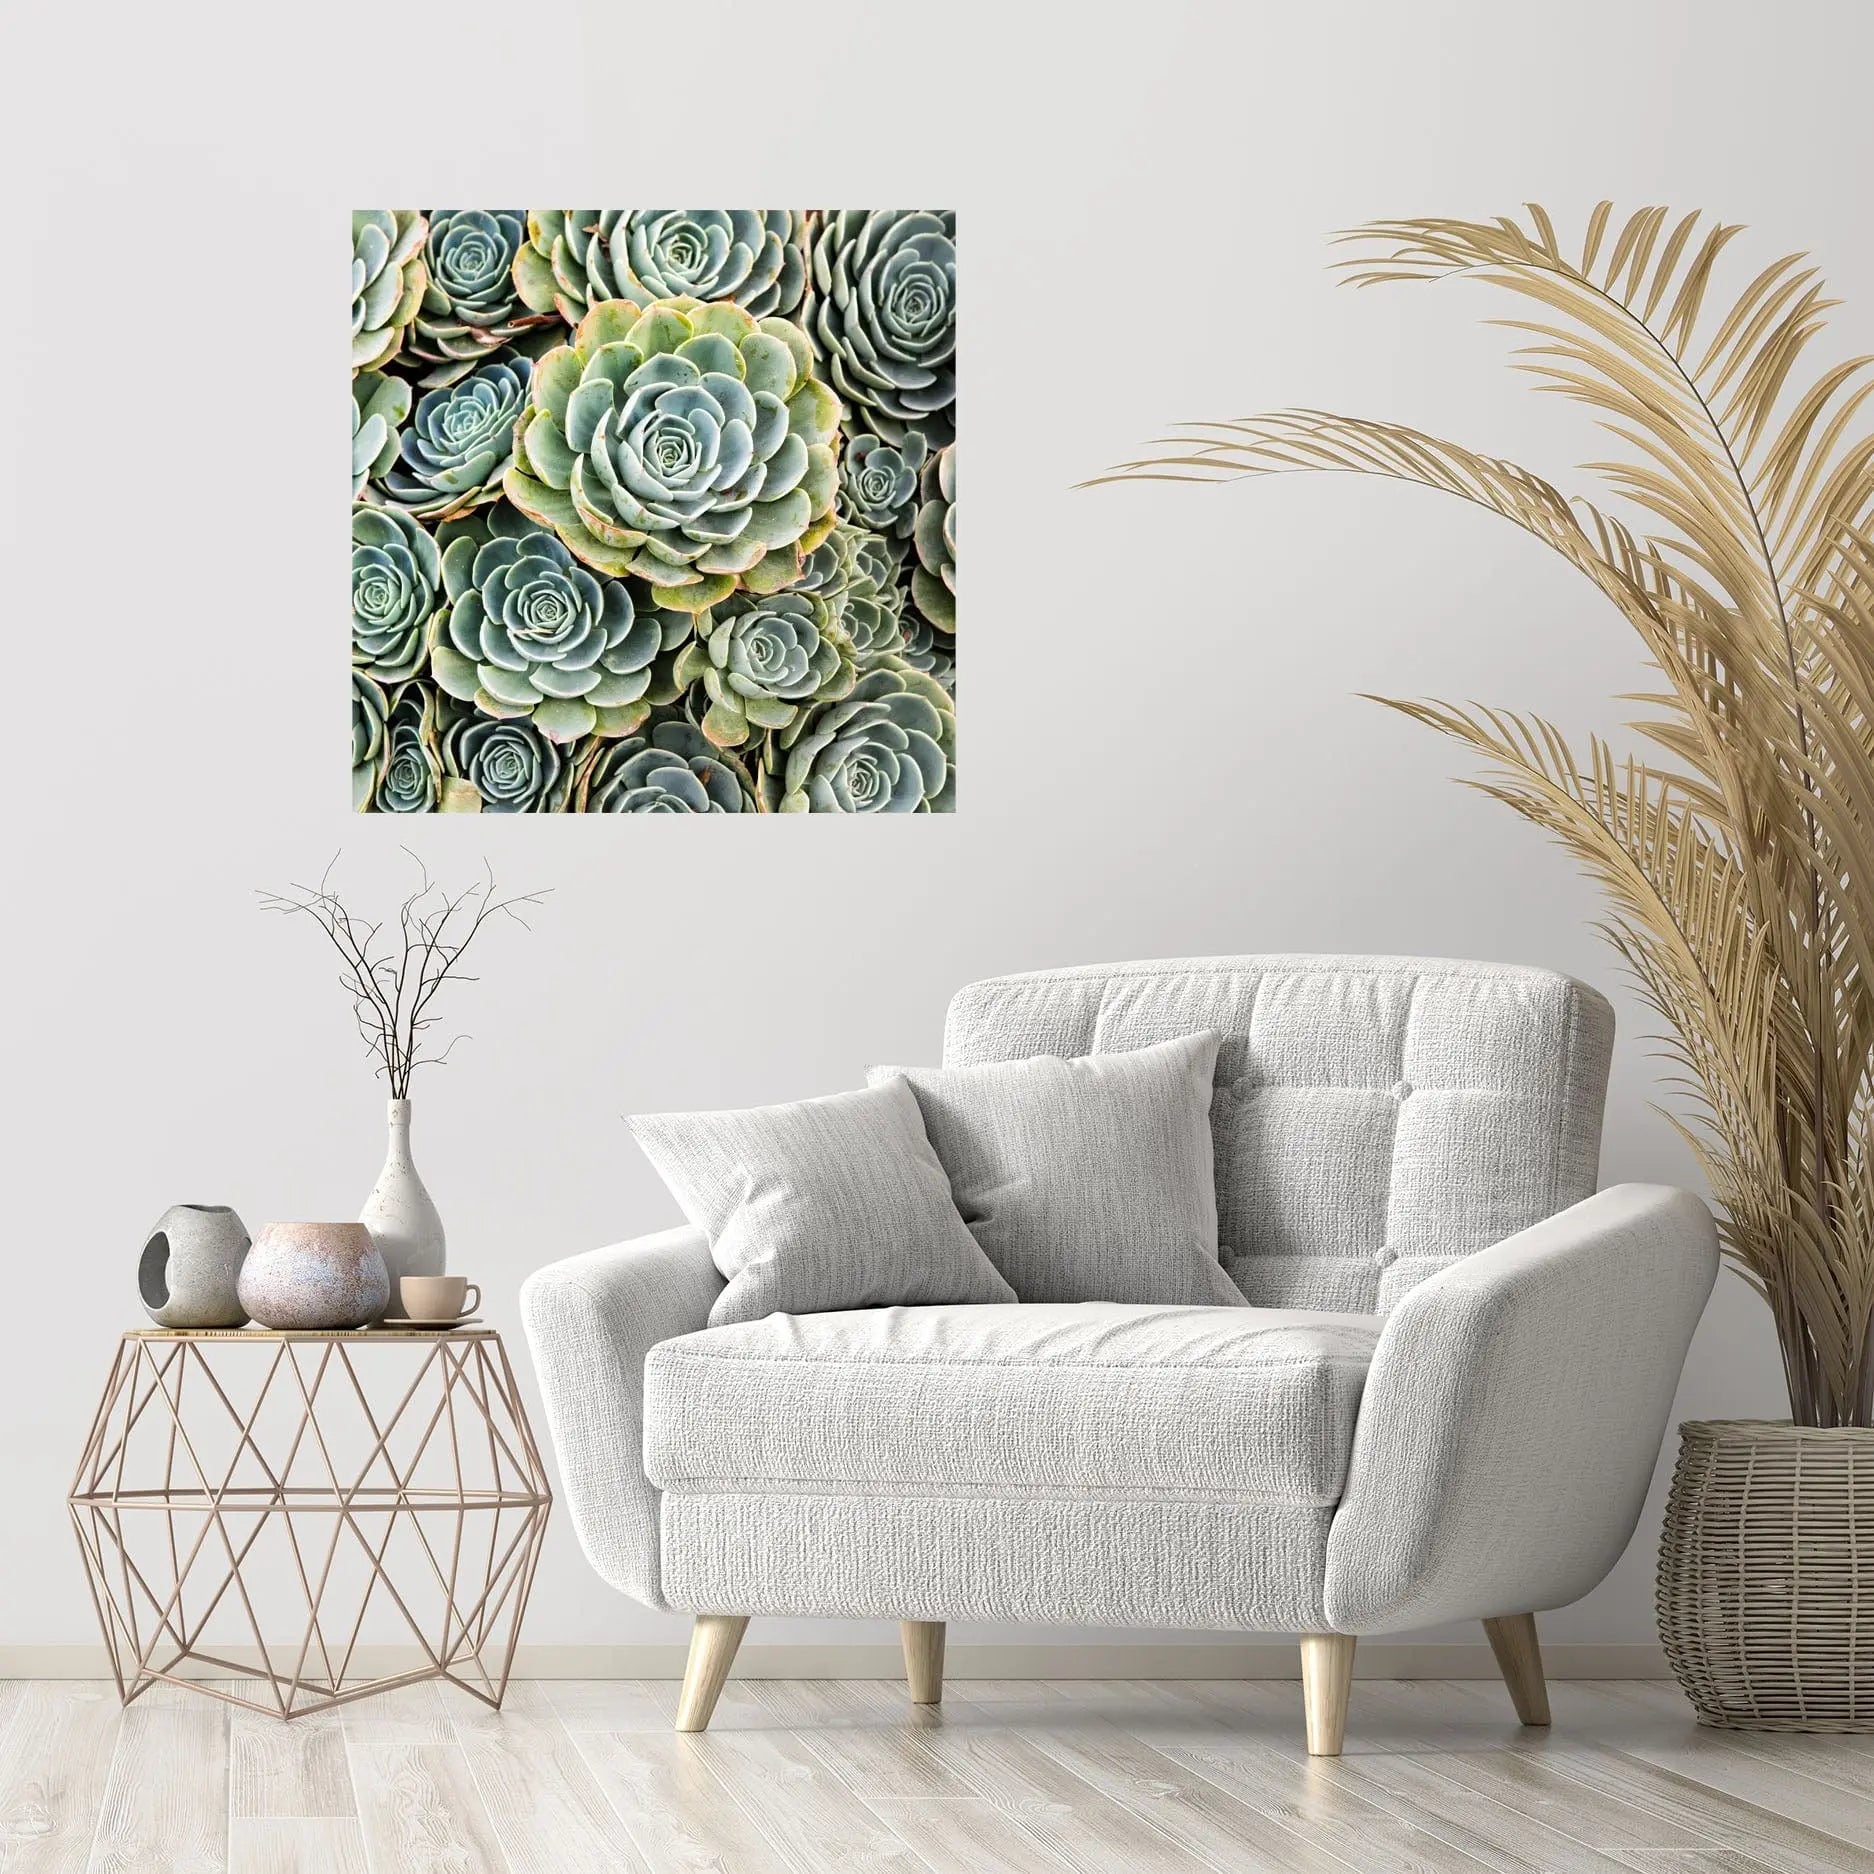 Large green hen chicks succulent photo art displayed on wall behind a chair